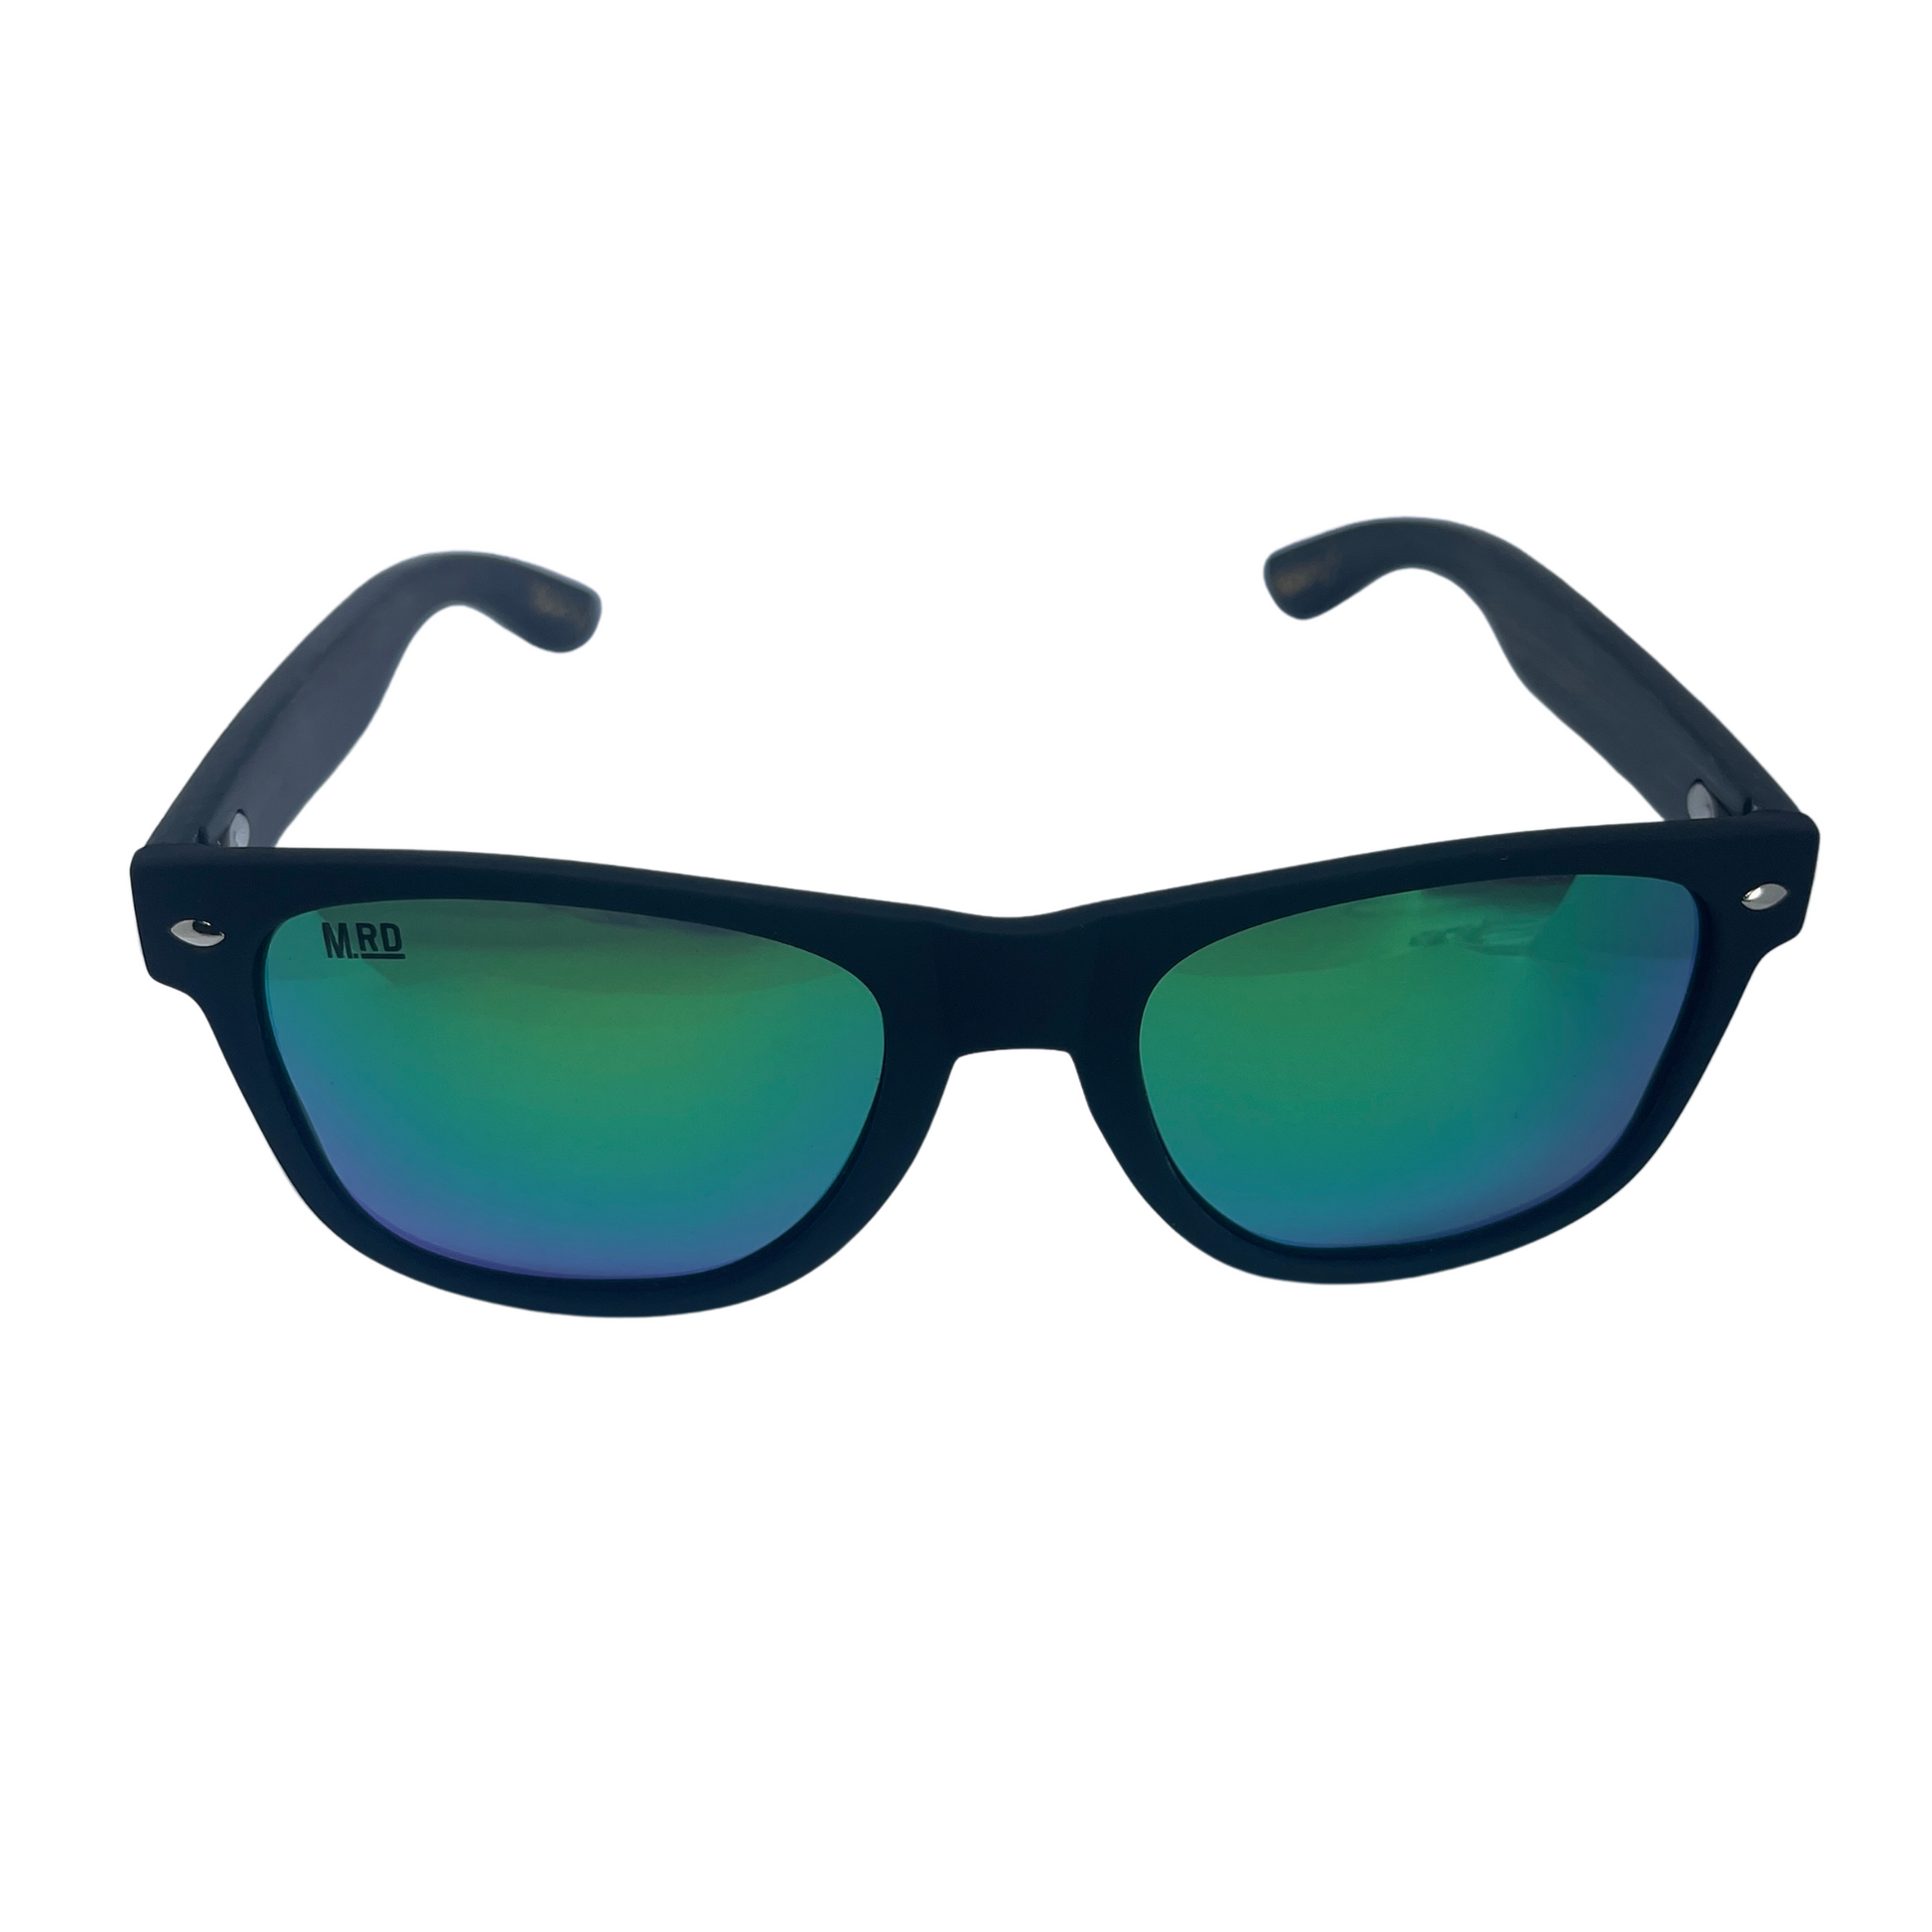 Sunglasses with dark wooden arms, black frames and green reflective lenses.